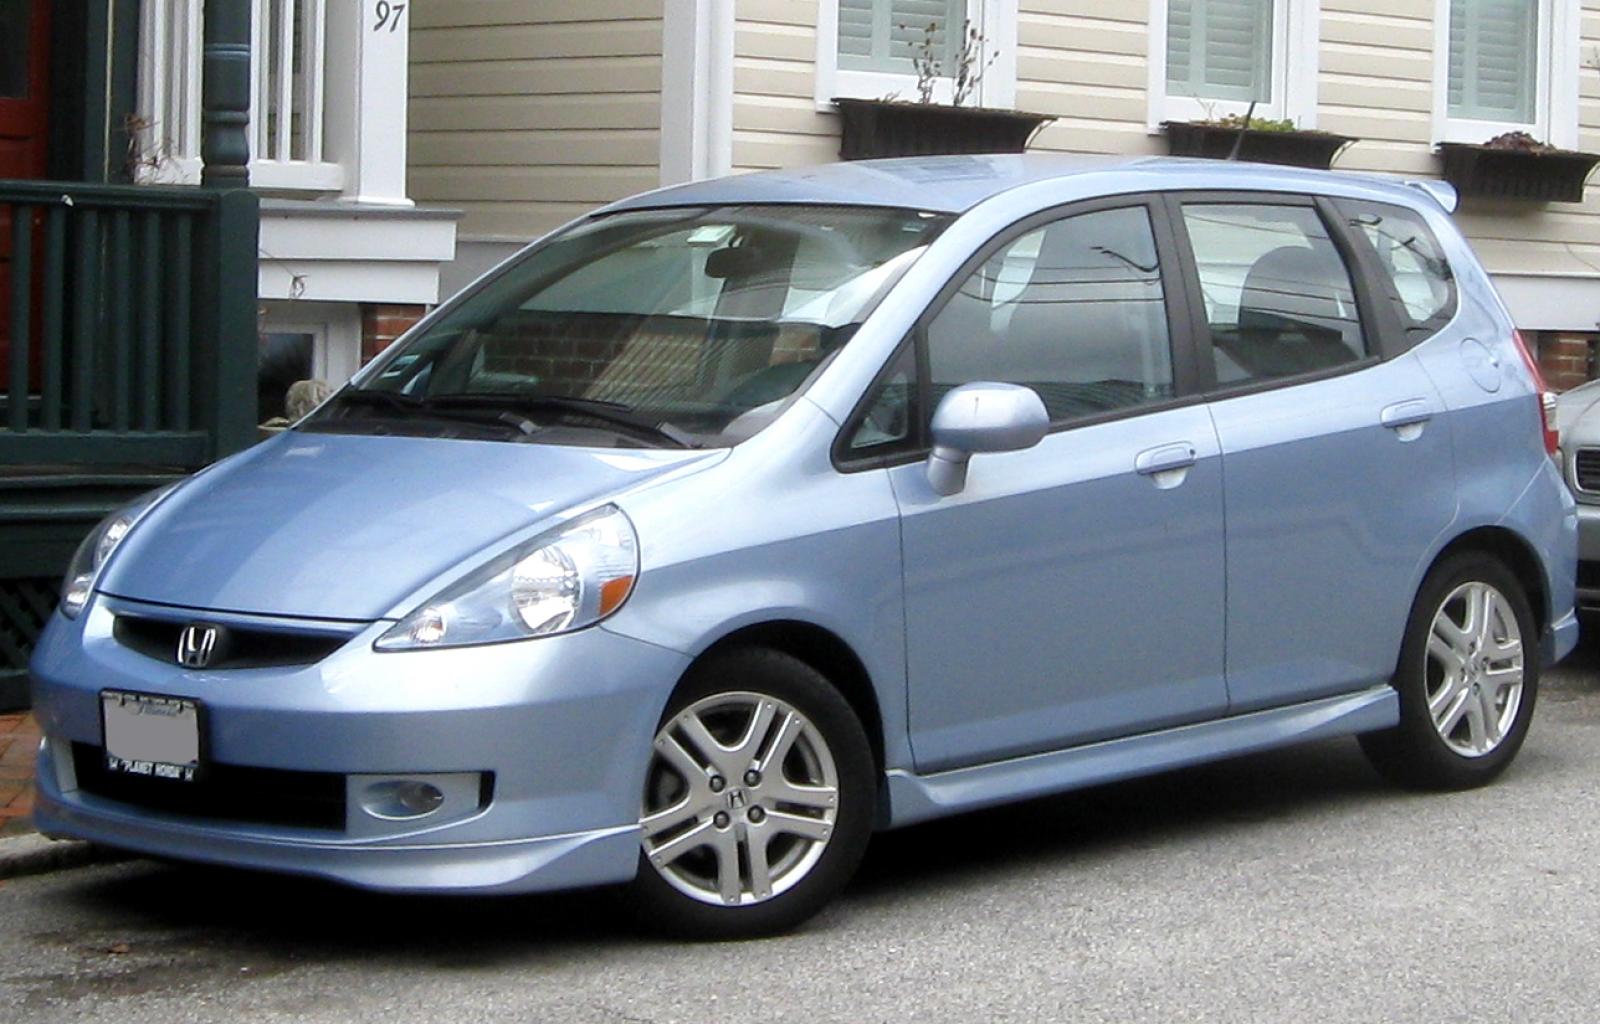 Fitter first. Хонда фит 1 поколение. Honda Fit 2001. Honda Fit 2008. Хонда фит 2008.